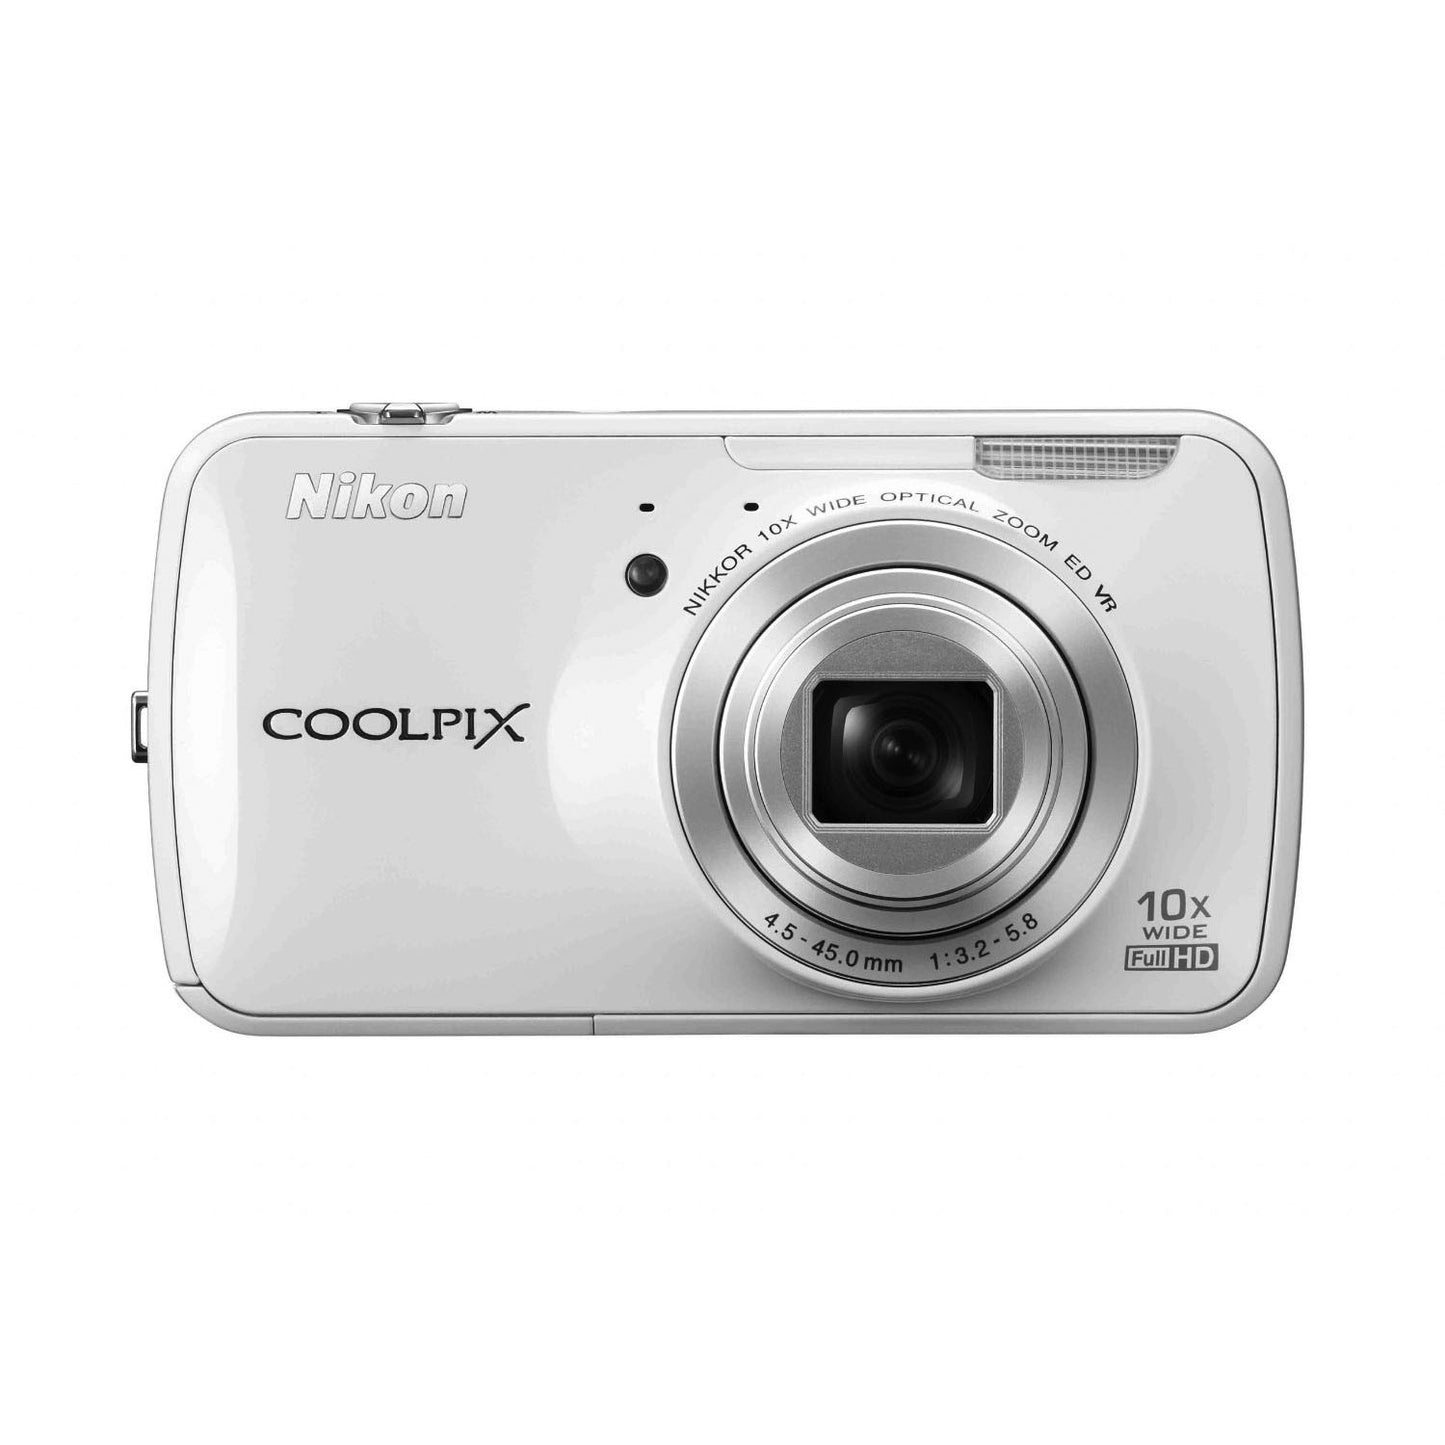 Nikon COOLPIX S800c 16 MP Digital Camera with 10x Optical Zoom and built-in Android Operating System (White) No Charger